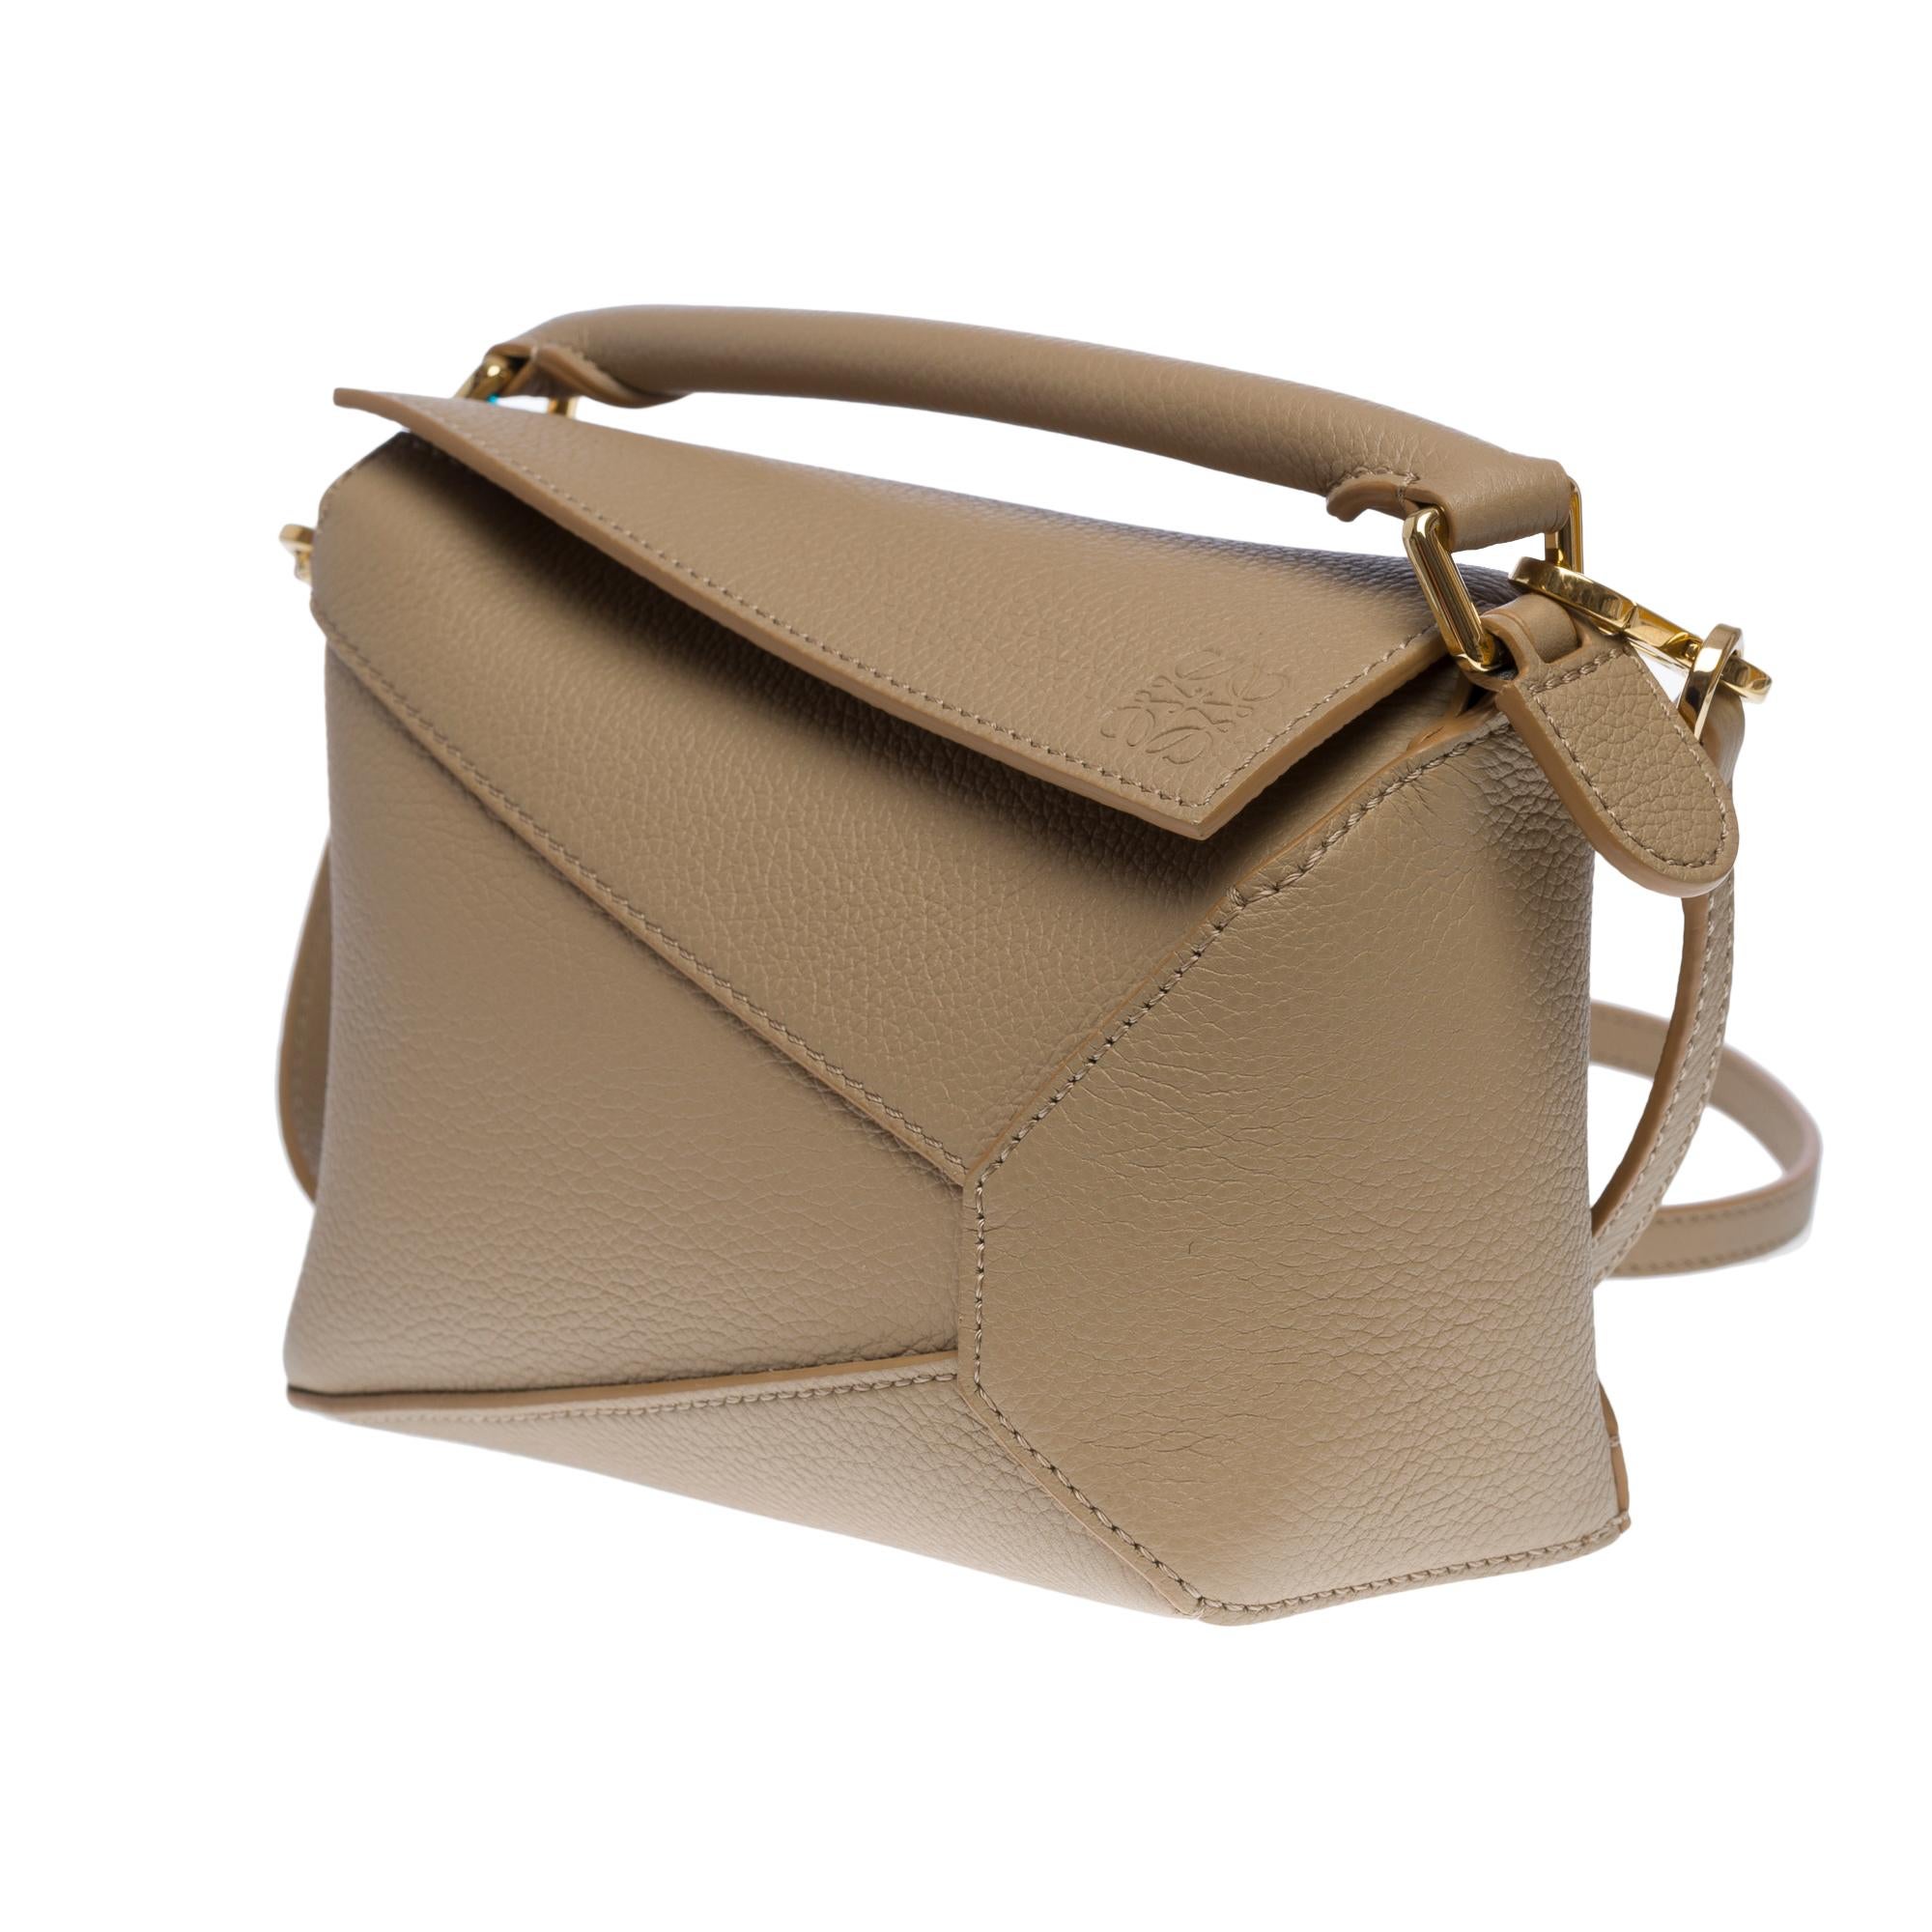 Very Chic Cuboid Loewe Puzzle Mini shoulder bag in grey calf leather designed by the artistic director of the brand Jonathan Anderson
Gold-tone metal hardware, simple gray leather handle, removable gray leather strap for hand or shoulder or